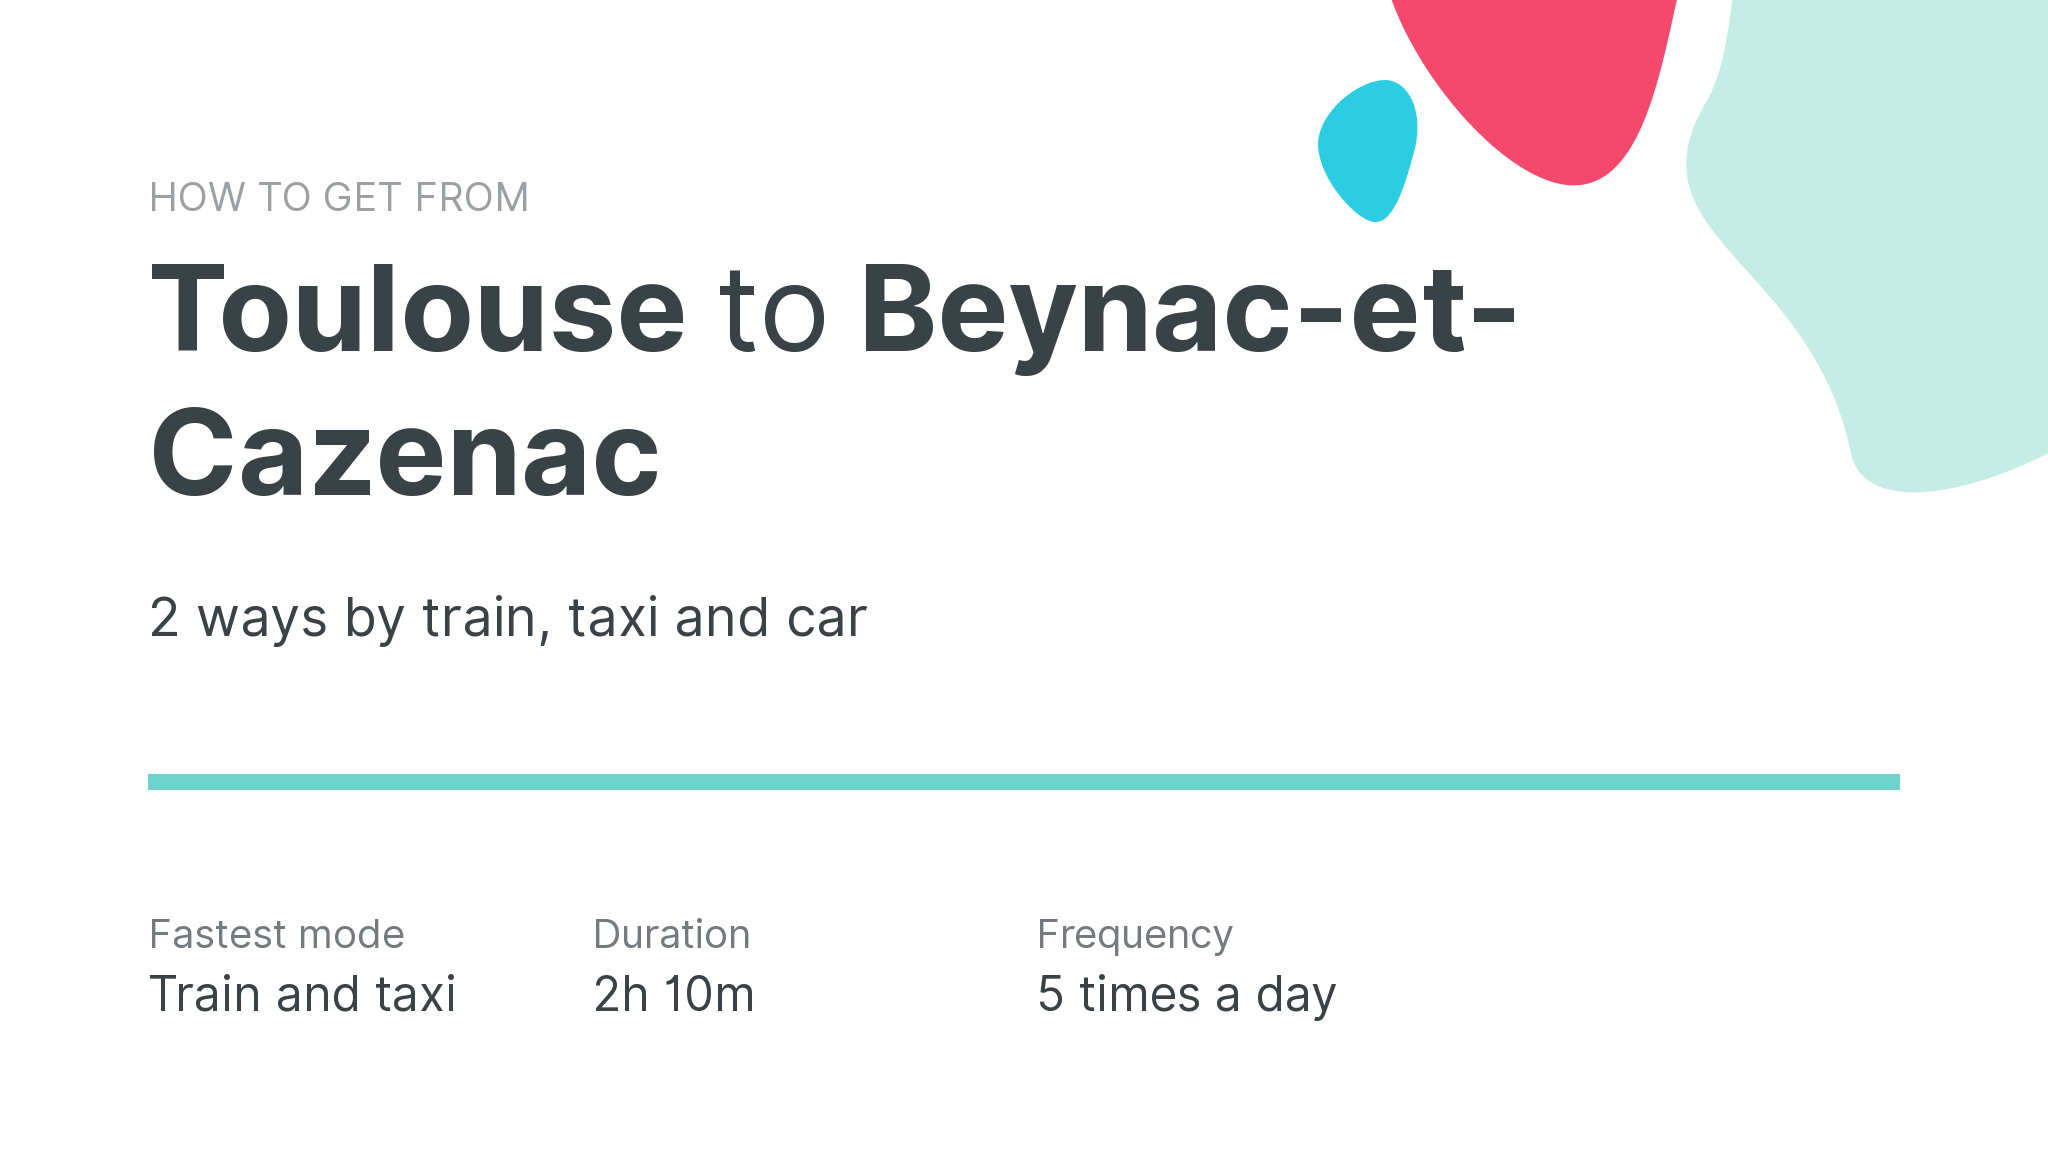 How do I get from Toulouse to Beynac-et-Cazenac